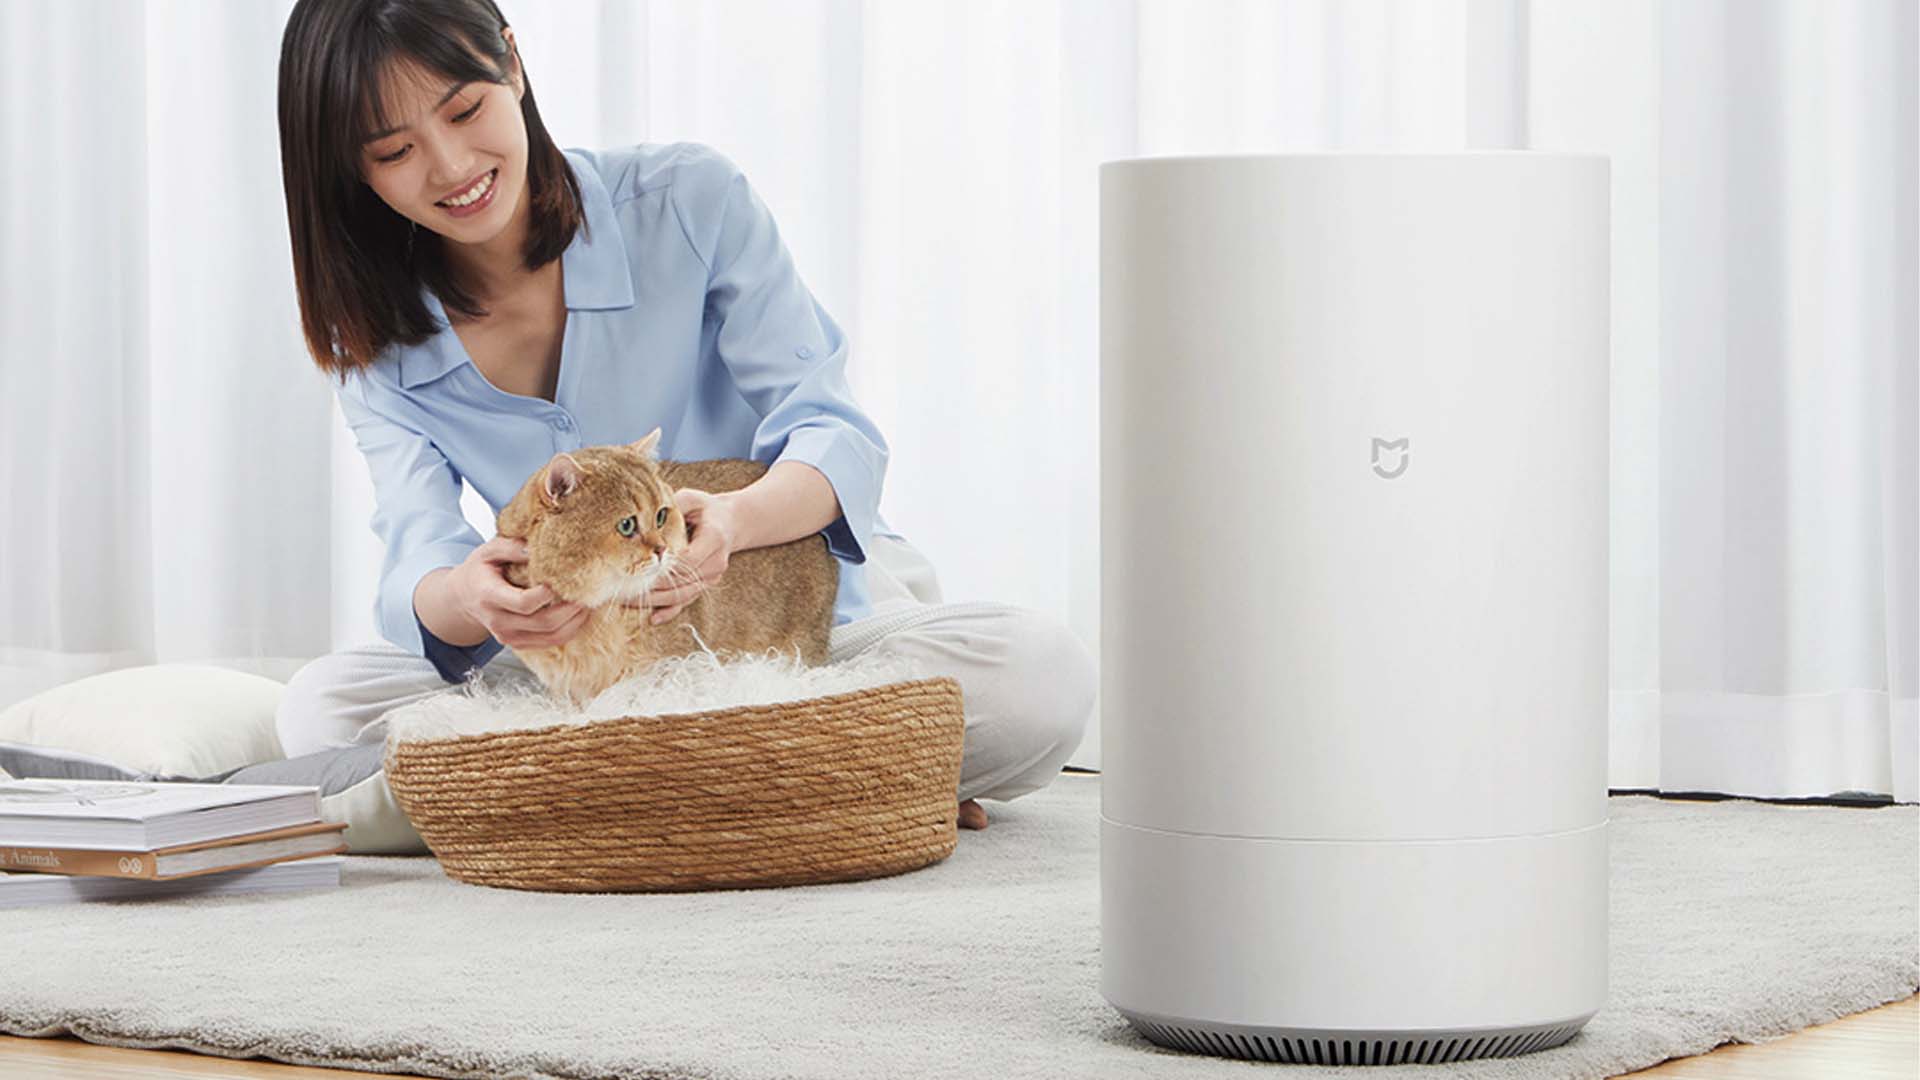 Need Humidity Control at Home All Winter. Is This Smart Humidifier the Answer